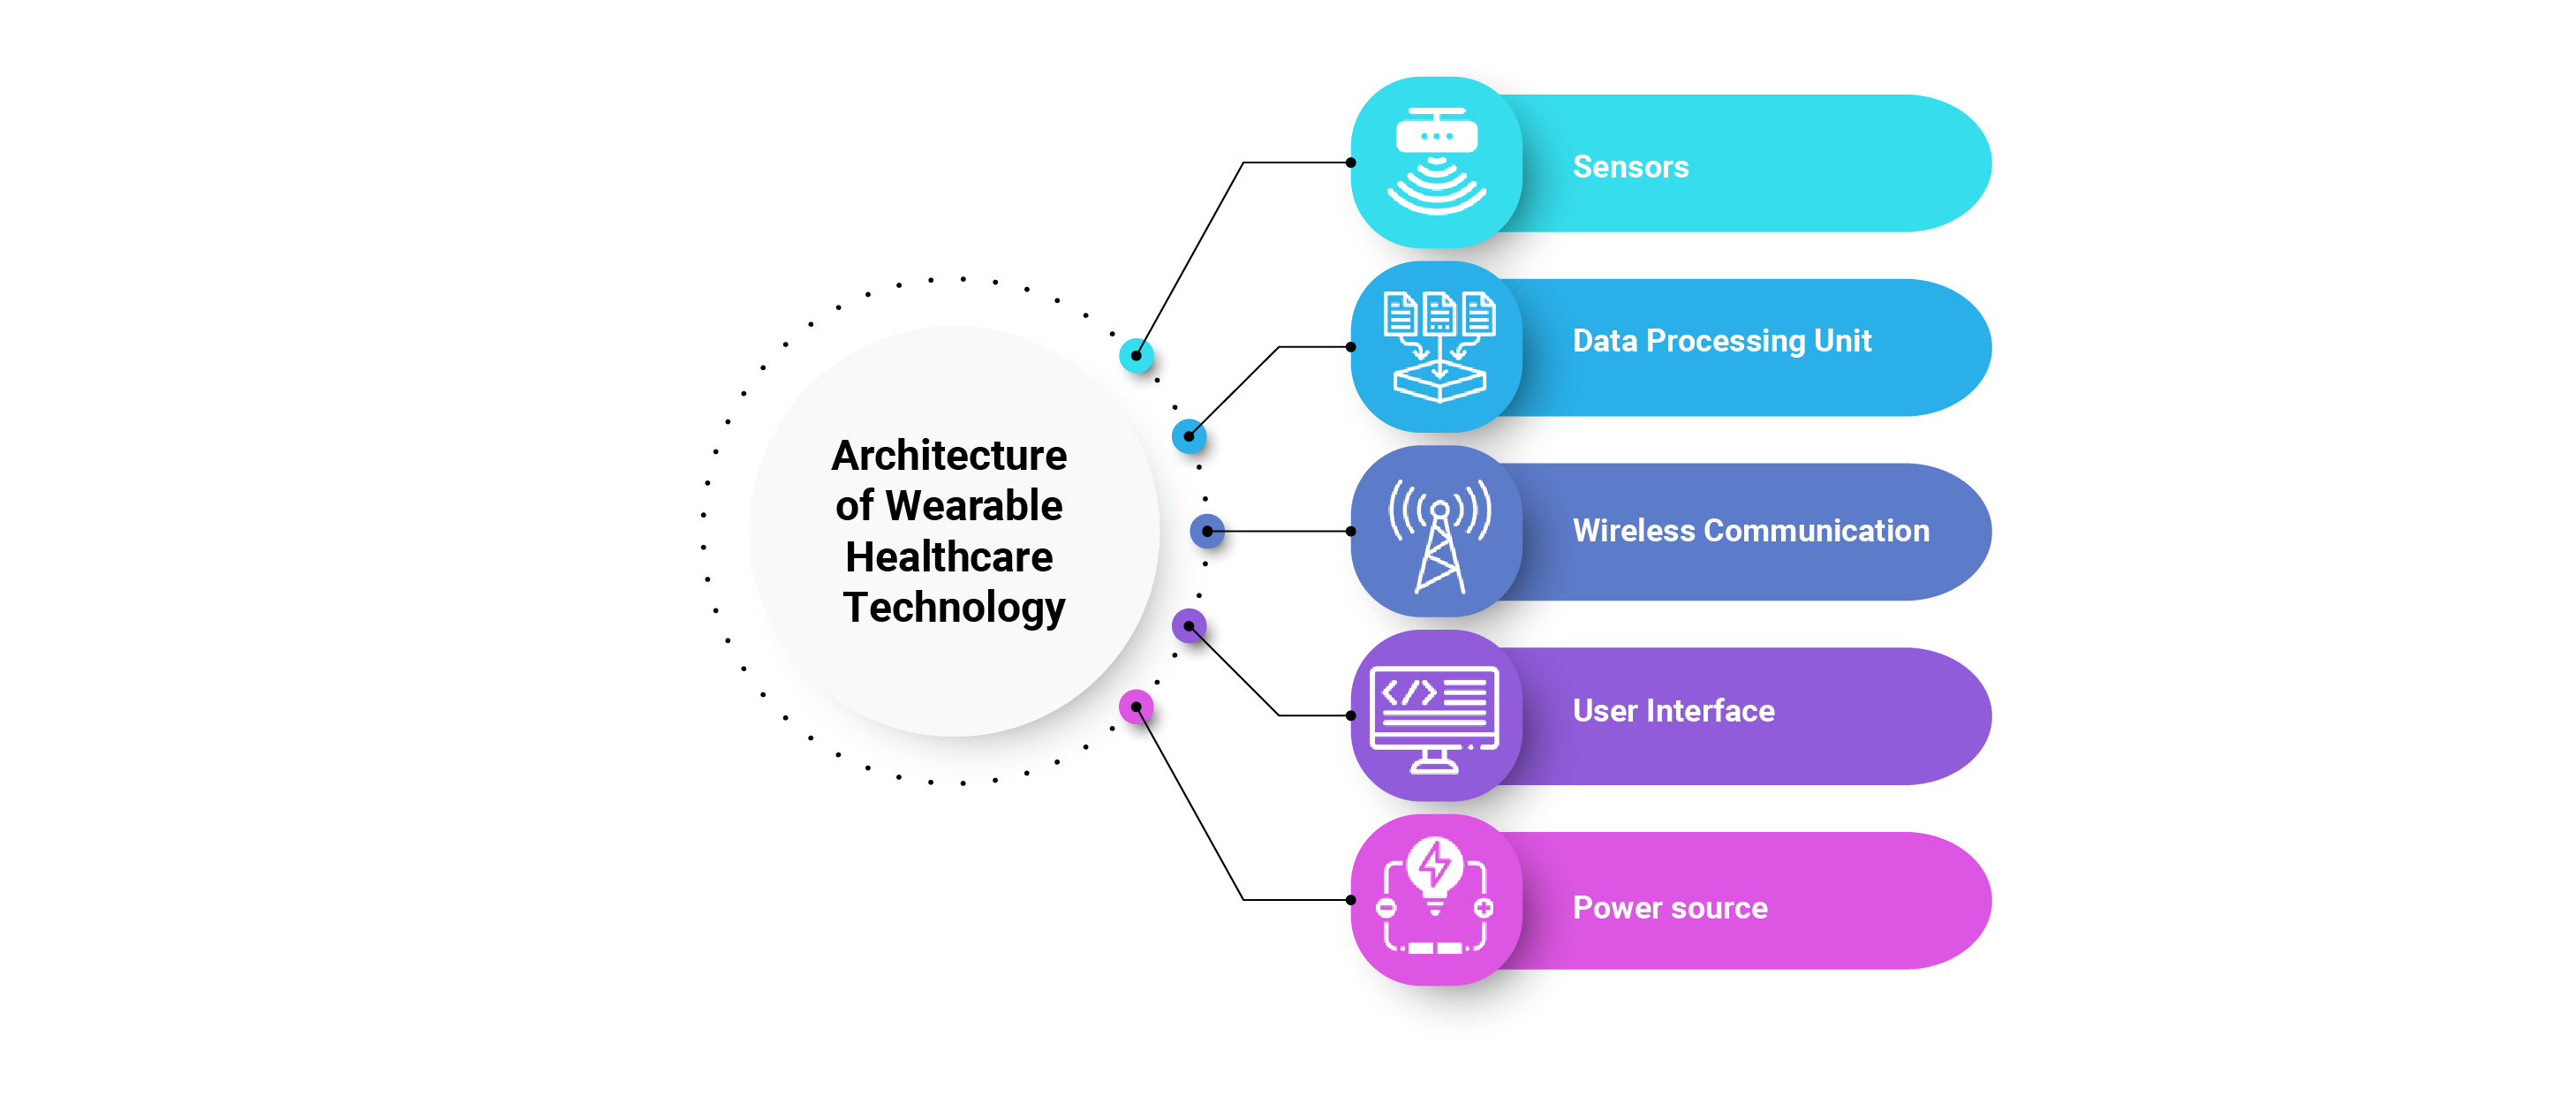 Architecture of wearable healthcare technology